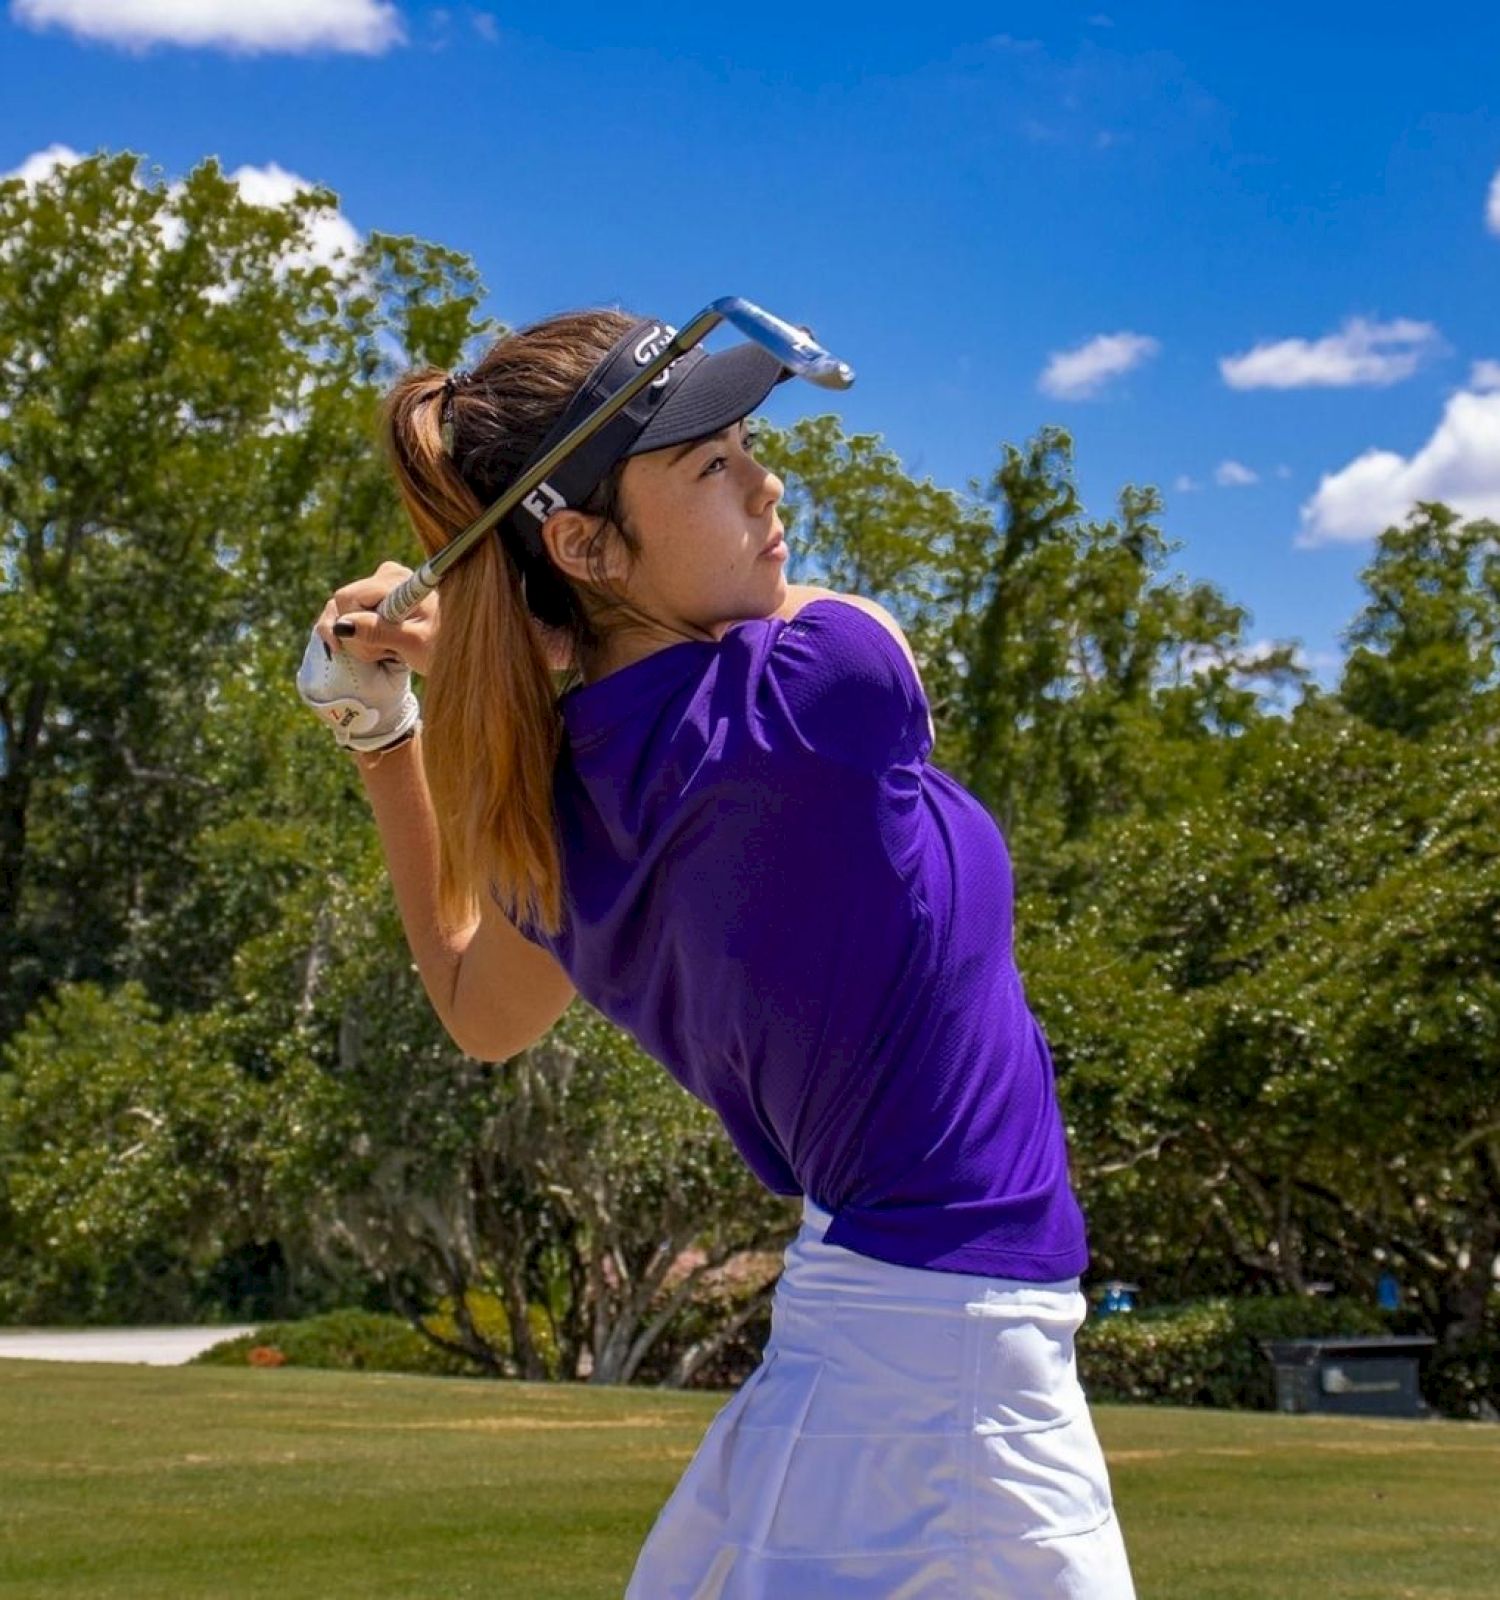 A person in a purple shirt and white skirt is swinging a golf club on a golf course under a blue sky with scattered clouds.